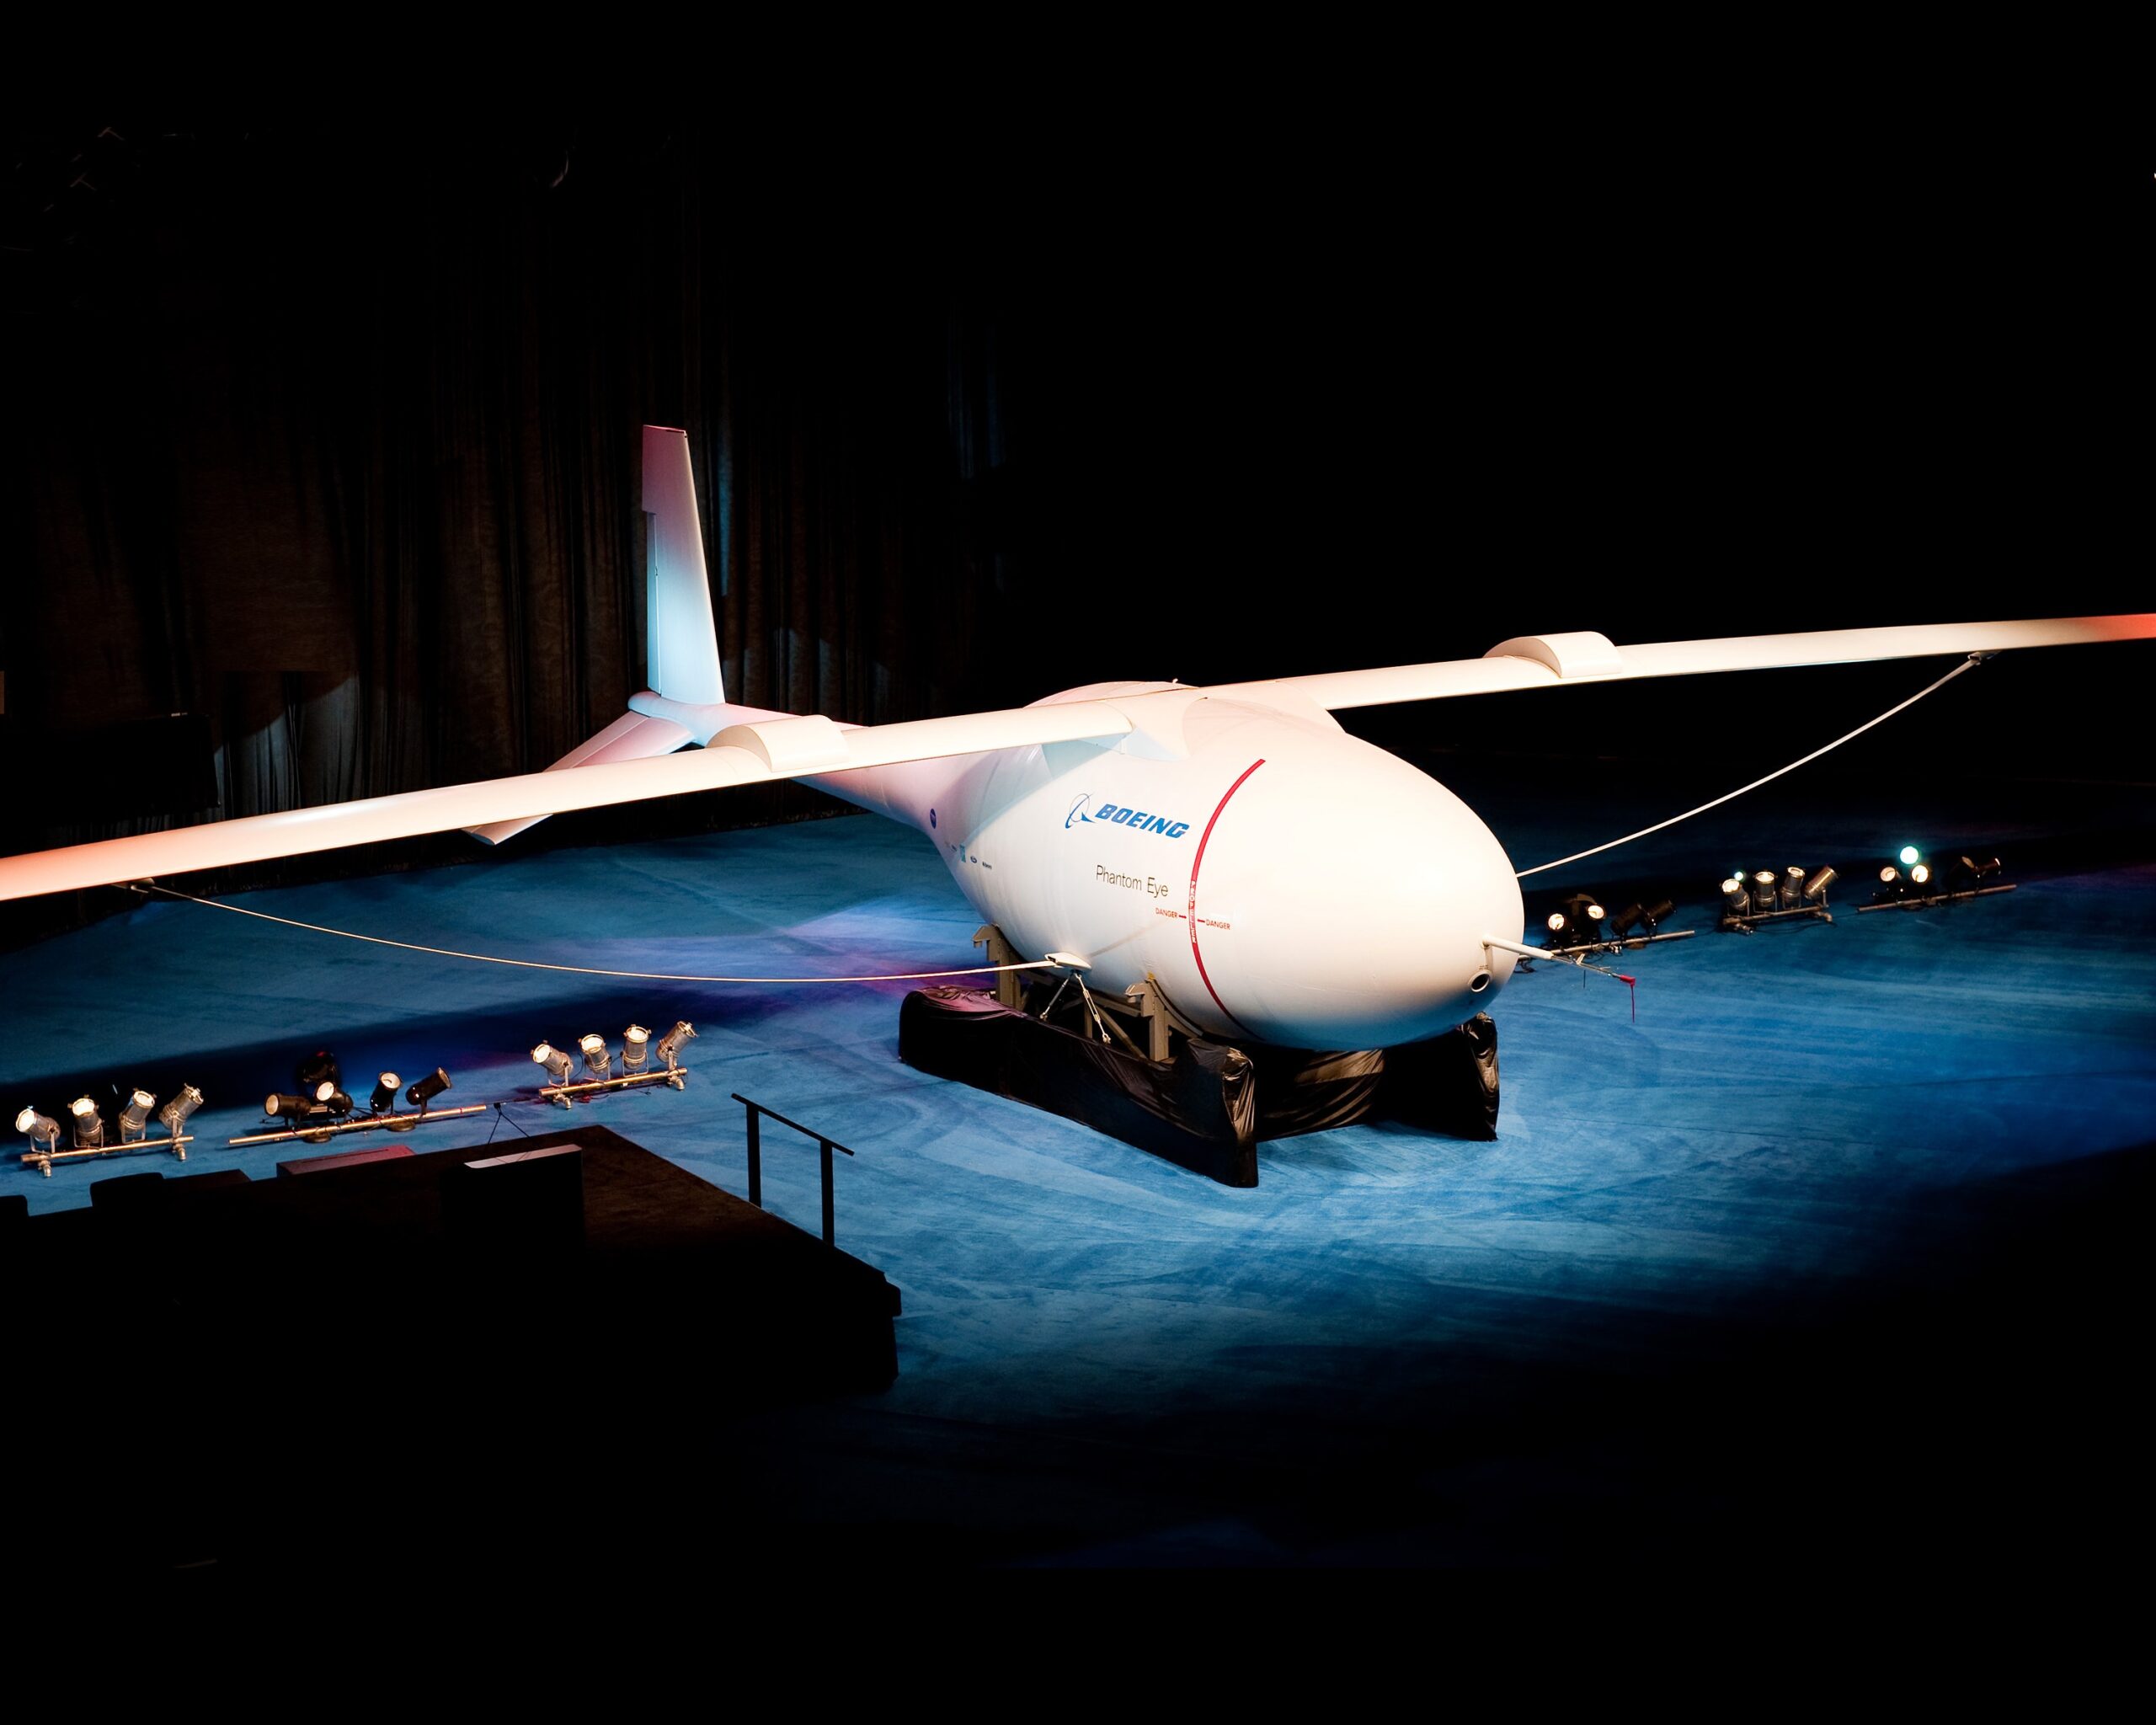 Boeing’s Corpulent Hydrogen-Powered Spy Plane Will Fly at 65,000 Feet For Four Days